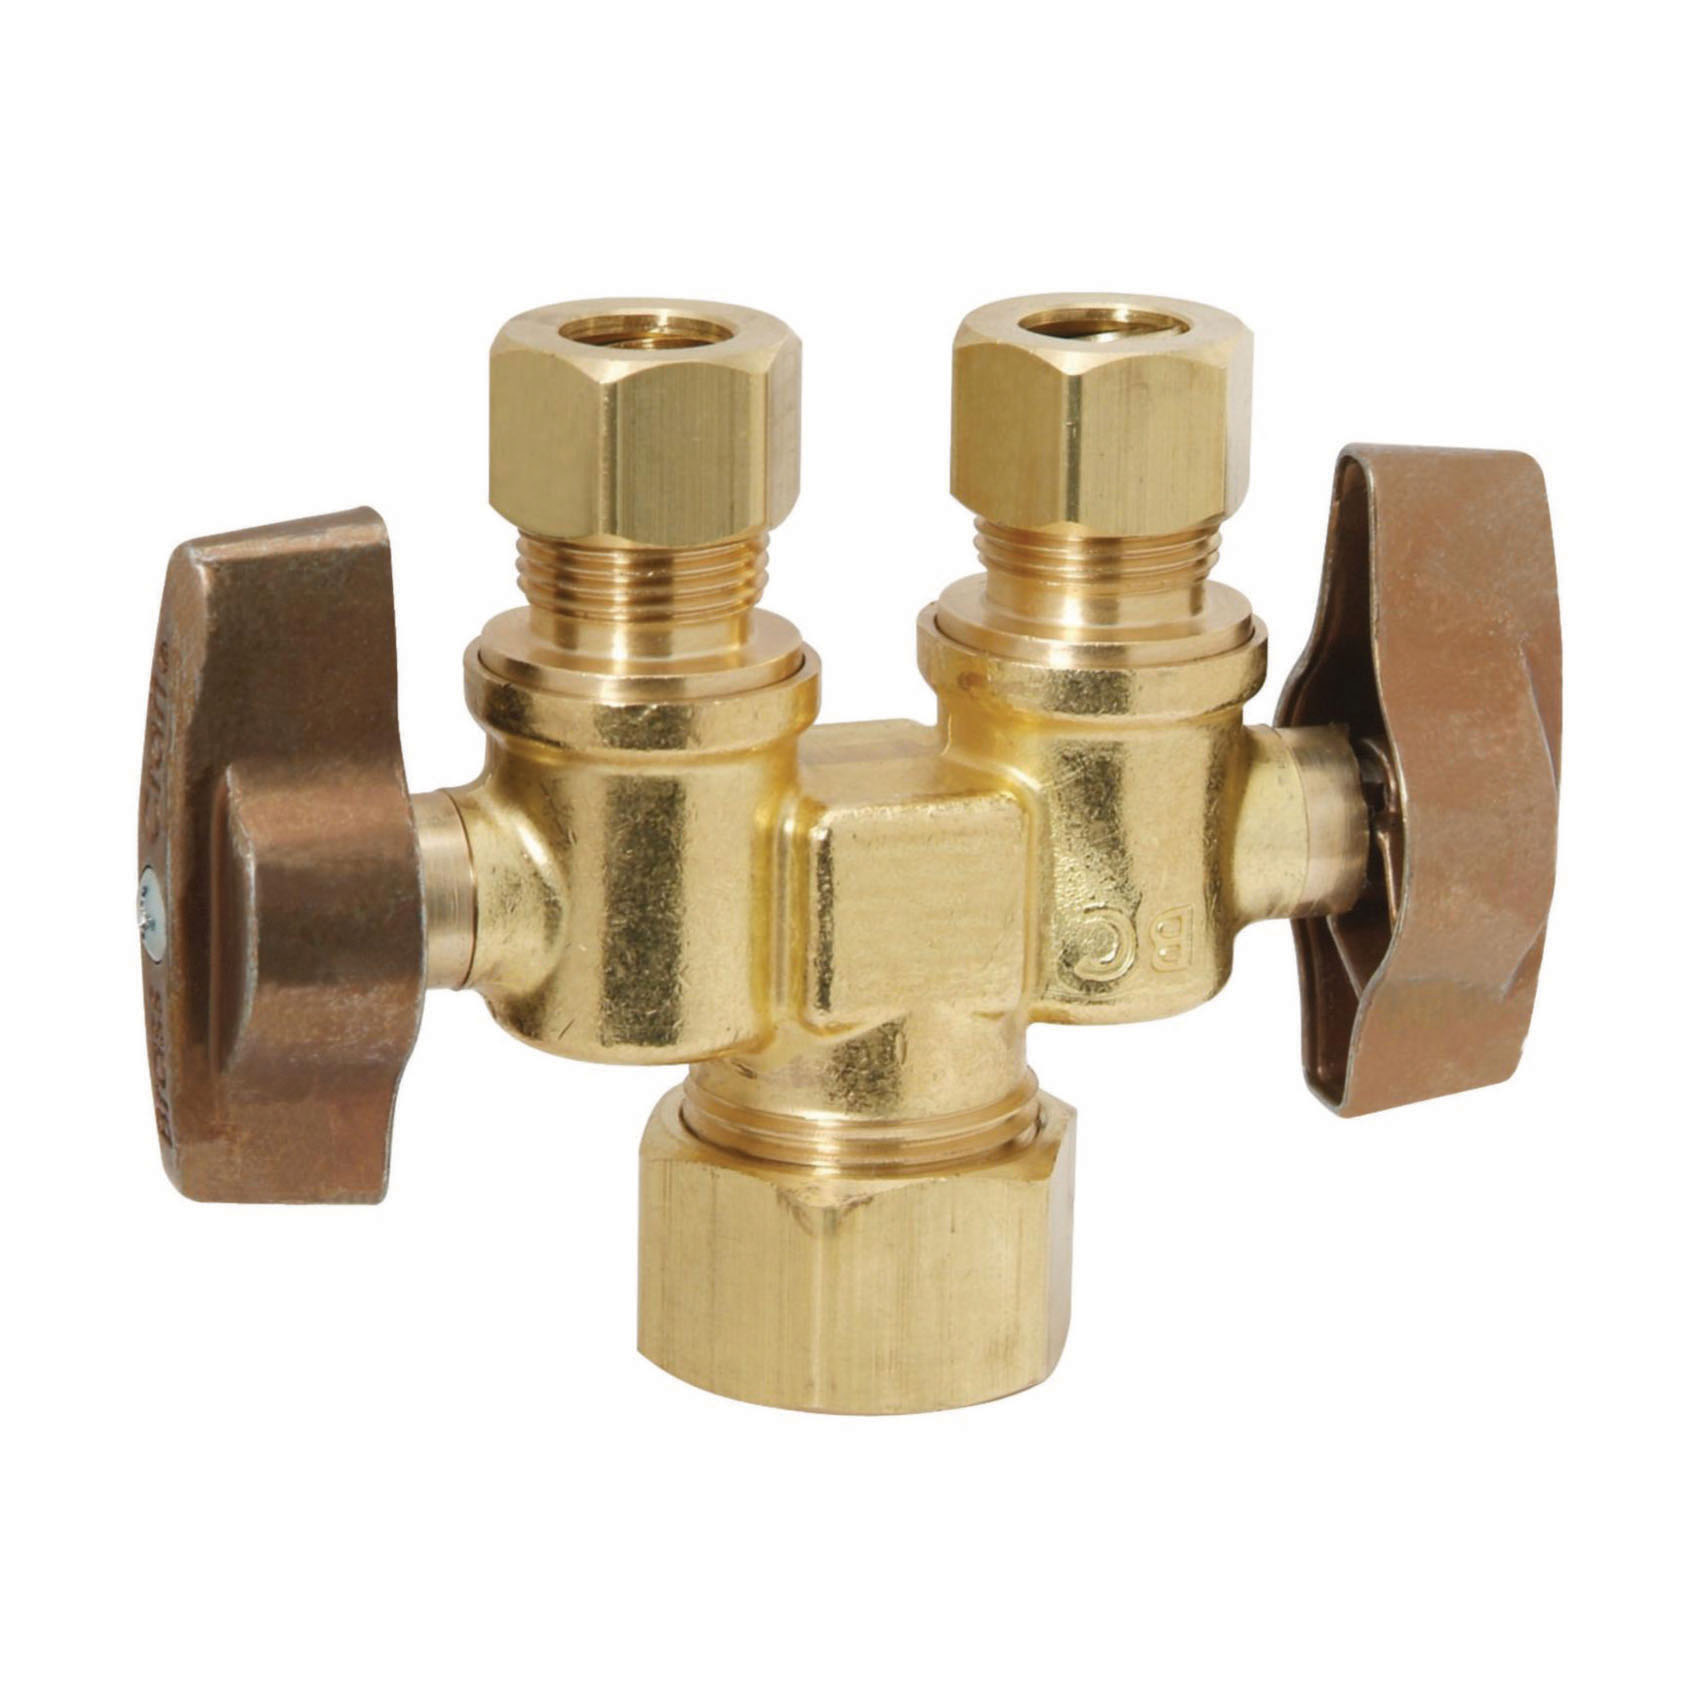 BrassCraft® KTCR1901DVSX R KT™ 1/4 Turn Dual Outlet/Dual Shut-Off Ball Straight Stop, 1/2 x 3/8 X 3/8 in Nominal, Compression End Style, 125 psi Pressure, Brass Body, Rough Brass, Import